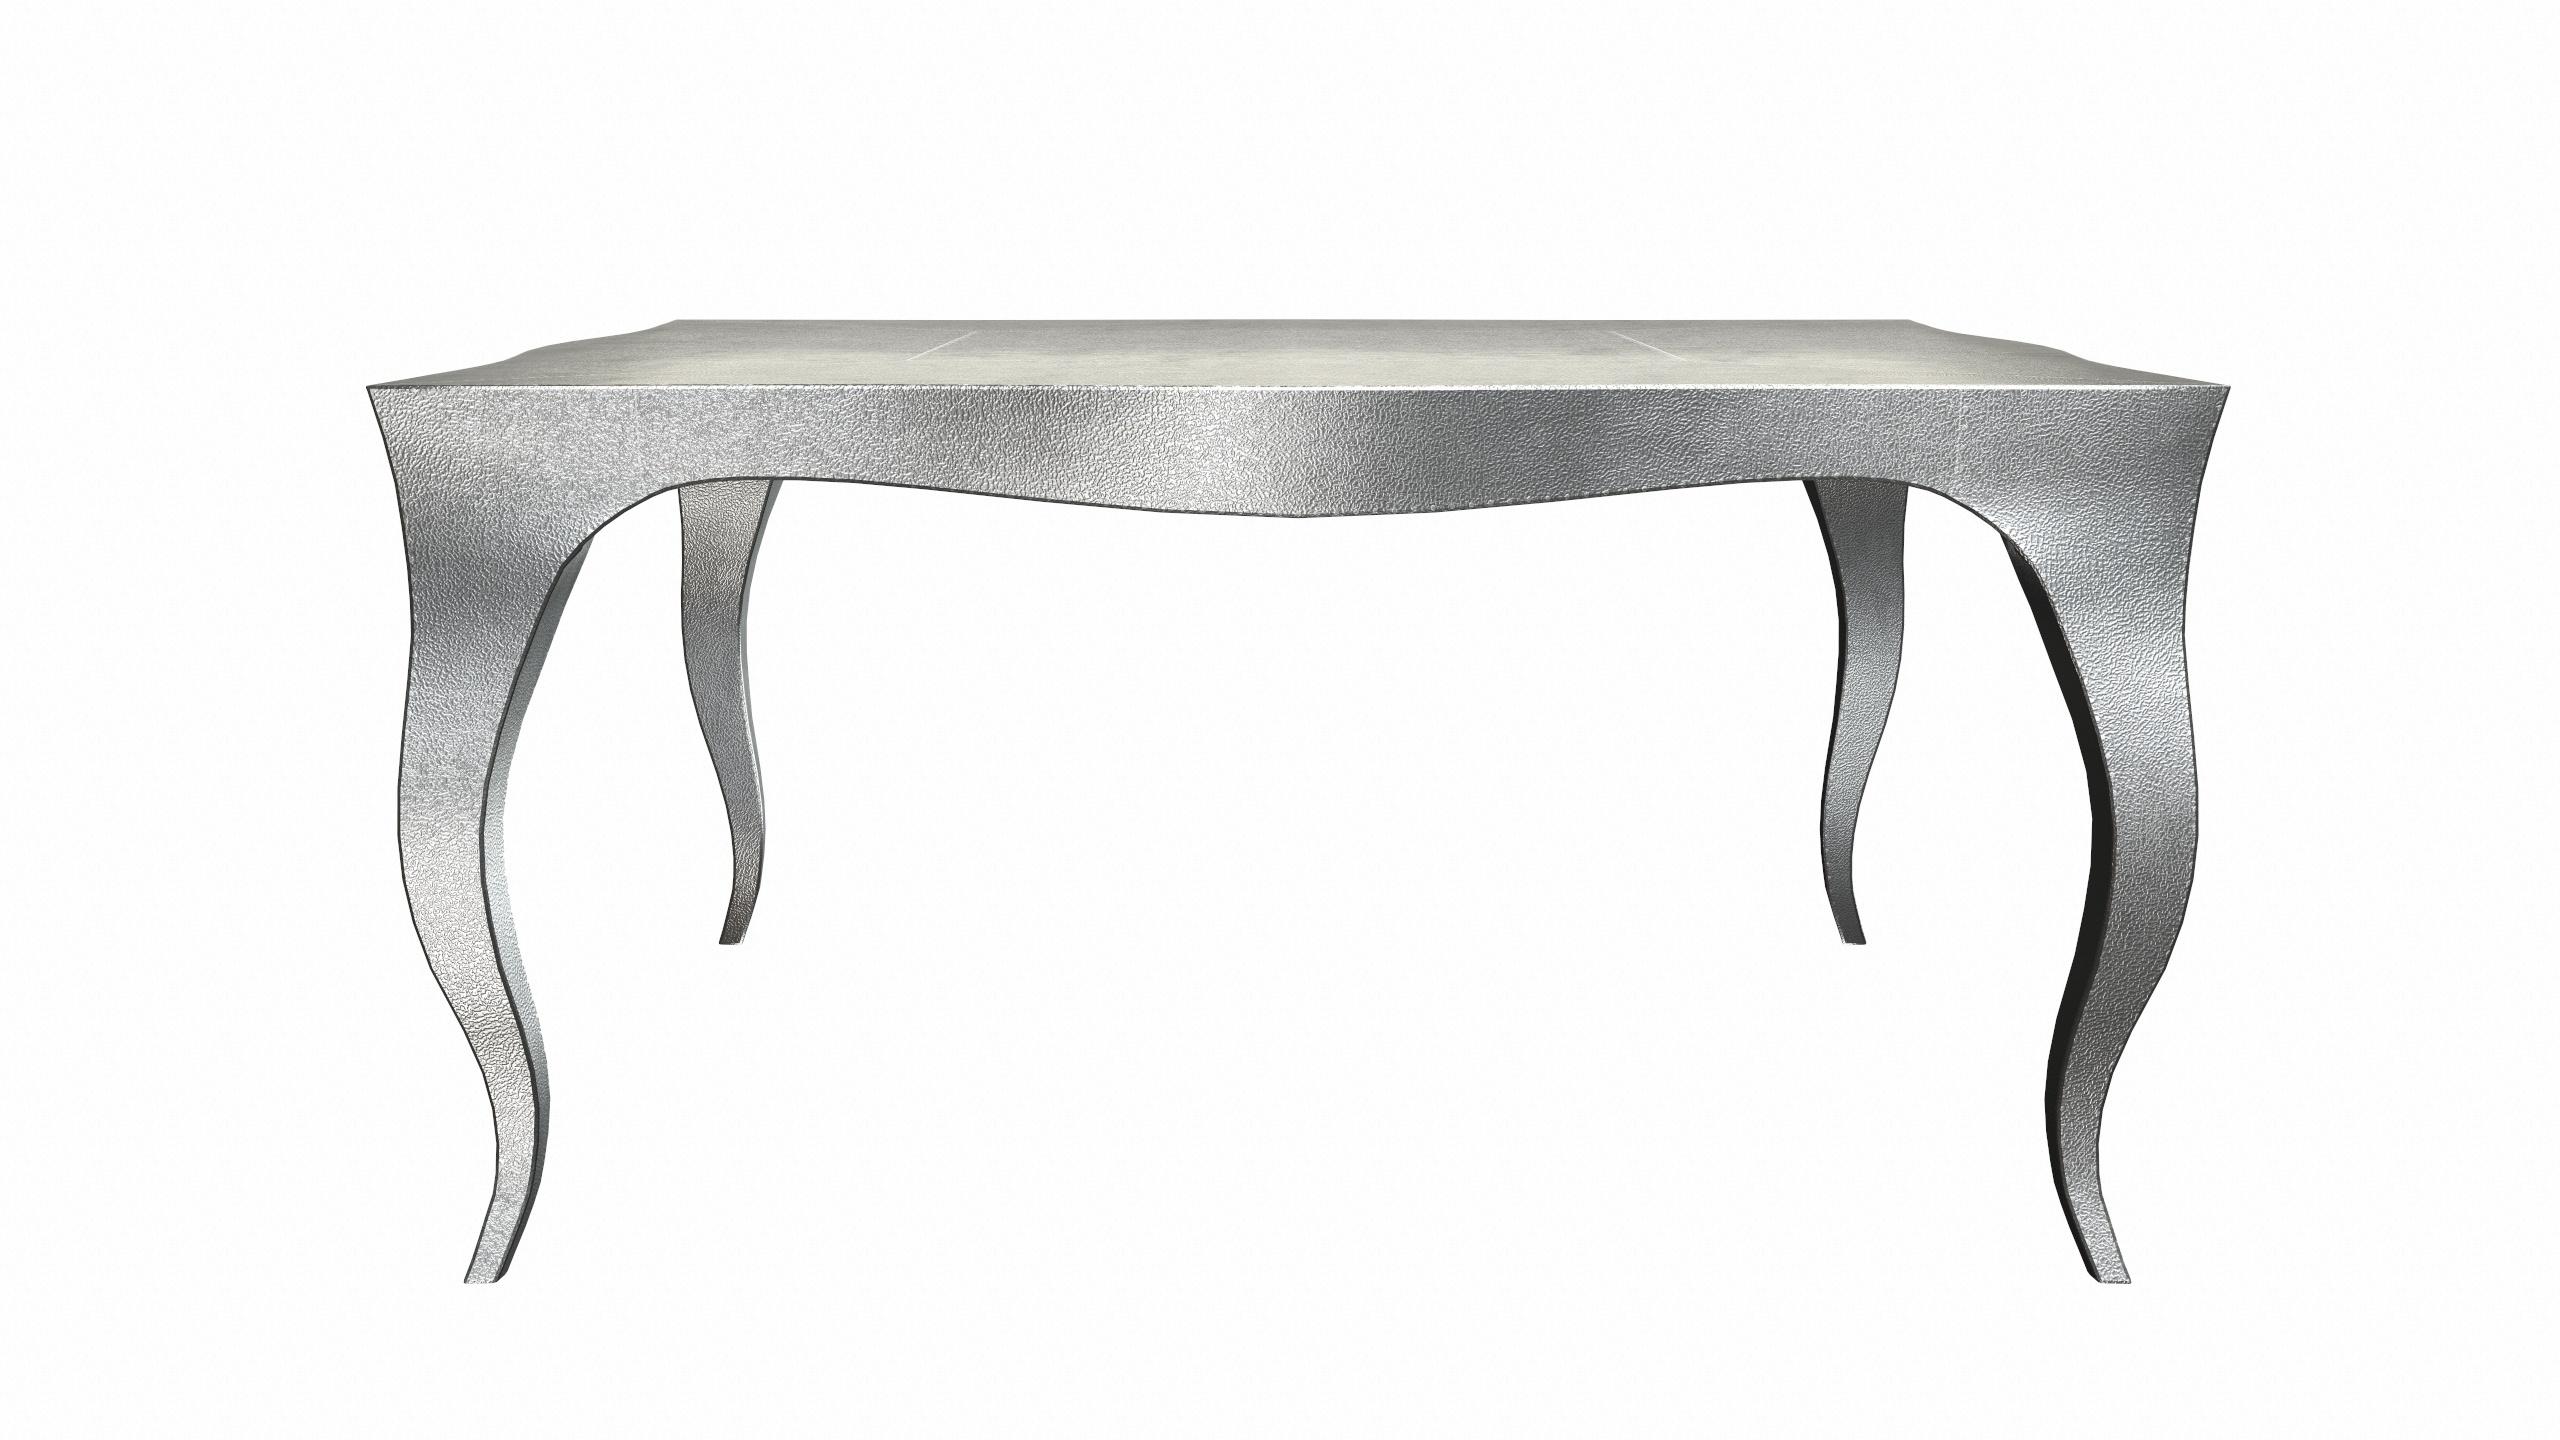 Américain Louise Art Deco Coffee and Cocktail Tables Fine Hammered White Bronze by Paul M. en vente